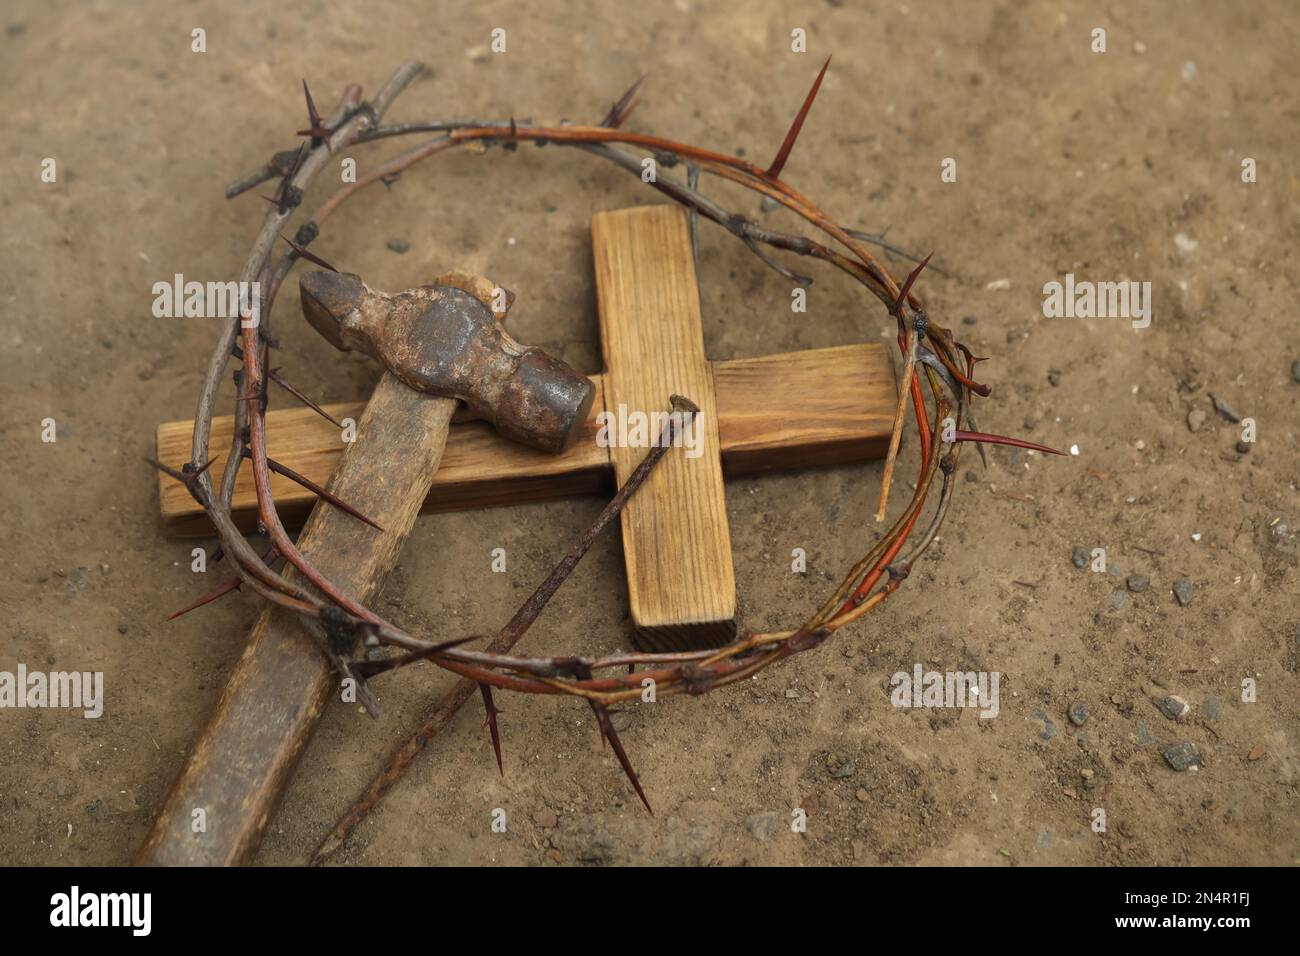 Crown of thorns, wooden cross and hammer with nail on ground, above view. Easter attributes Stock Photo